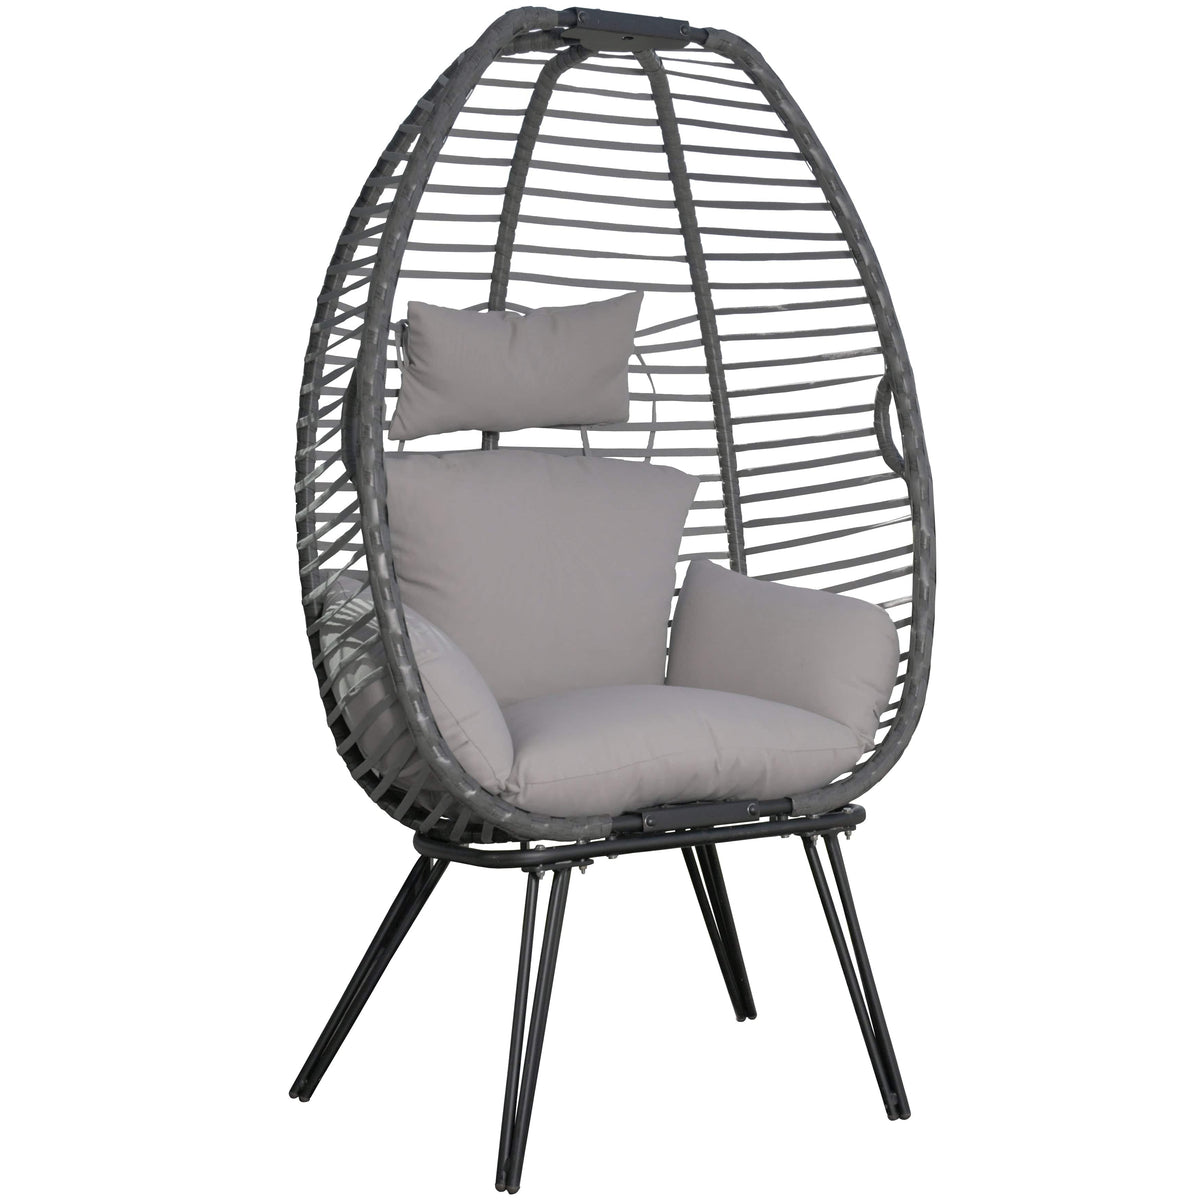 Nest Egg Chair with Legs - Moonstone